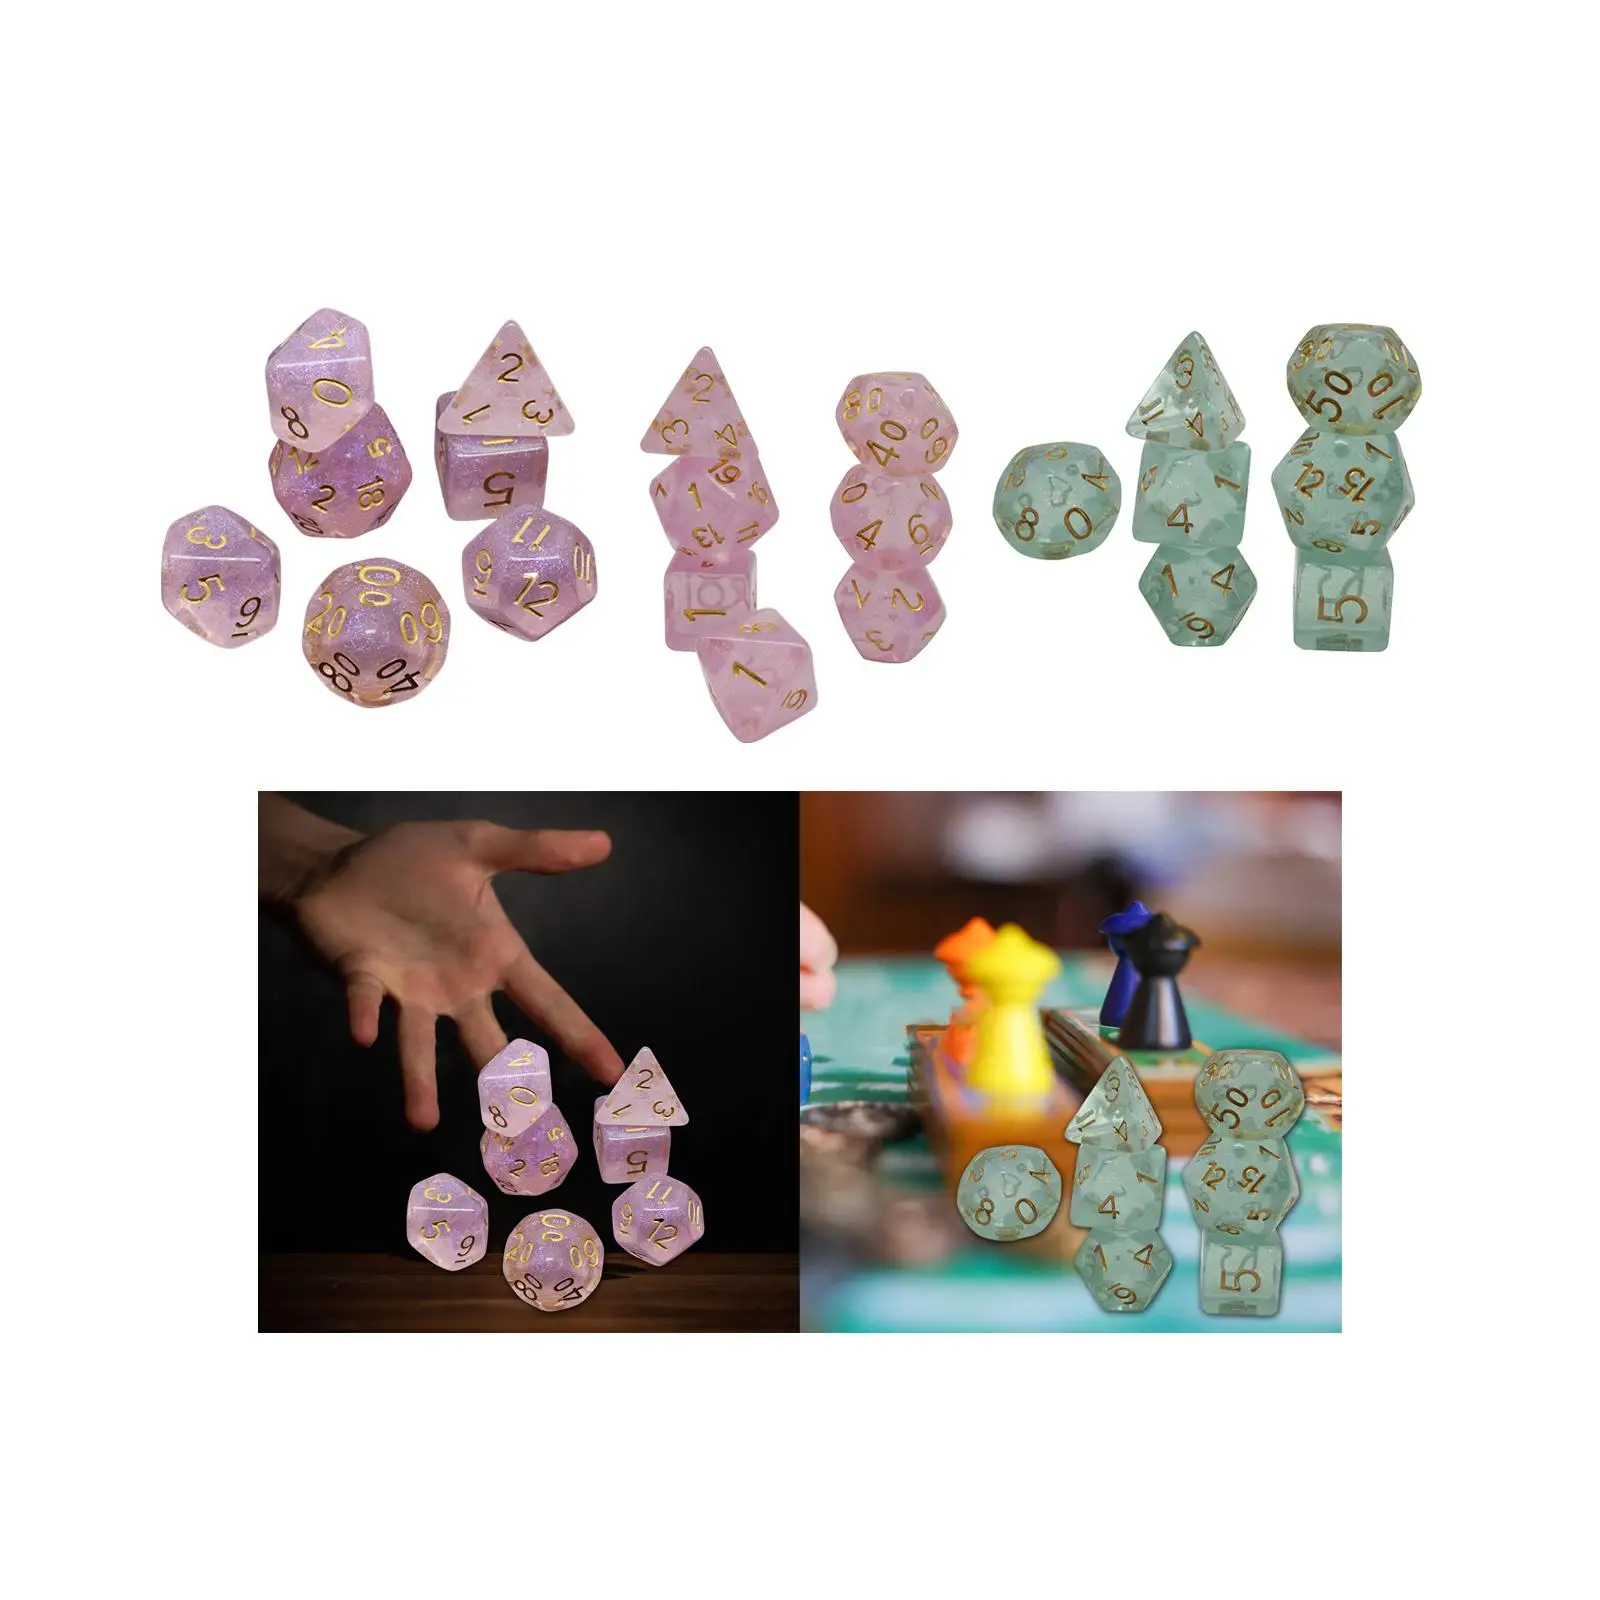 7 Pieces Acrylic Dices Party Supplies Role Playing Game Dices D4 D8 D10 D12 D20 Polyhedral Dices for Party Table Game Card Game